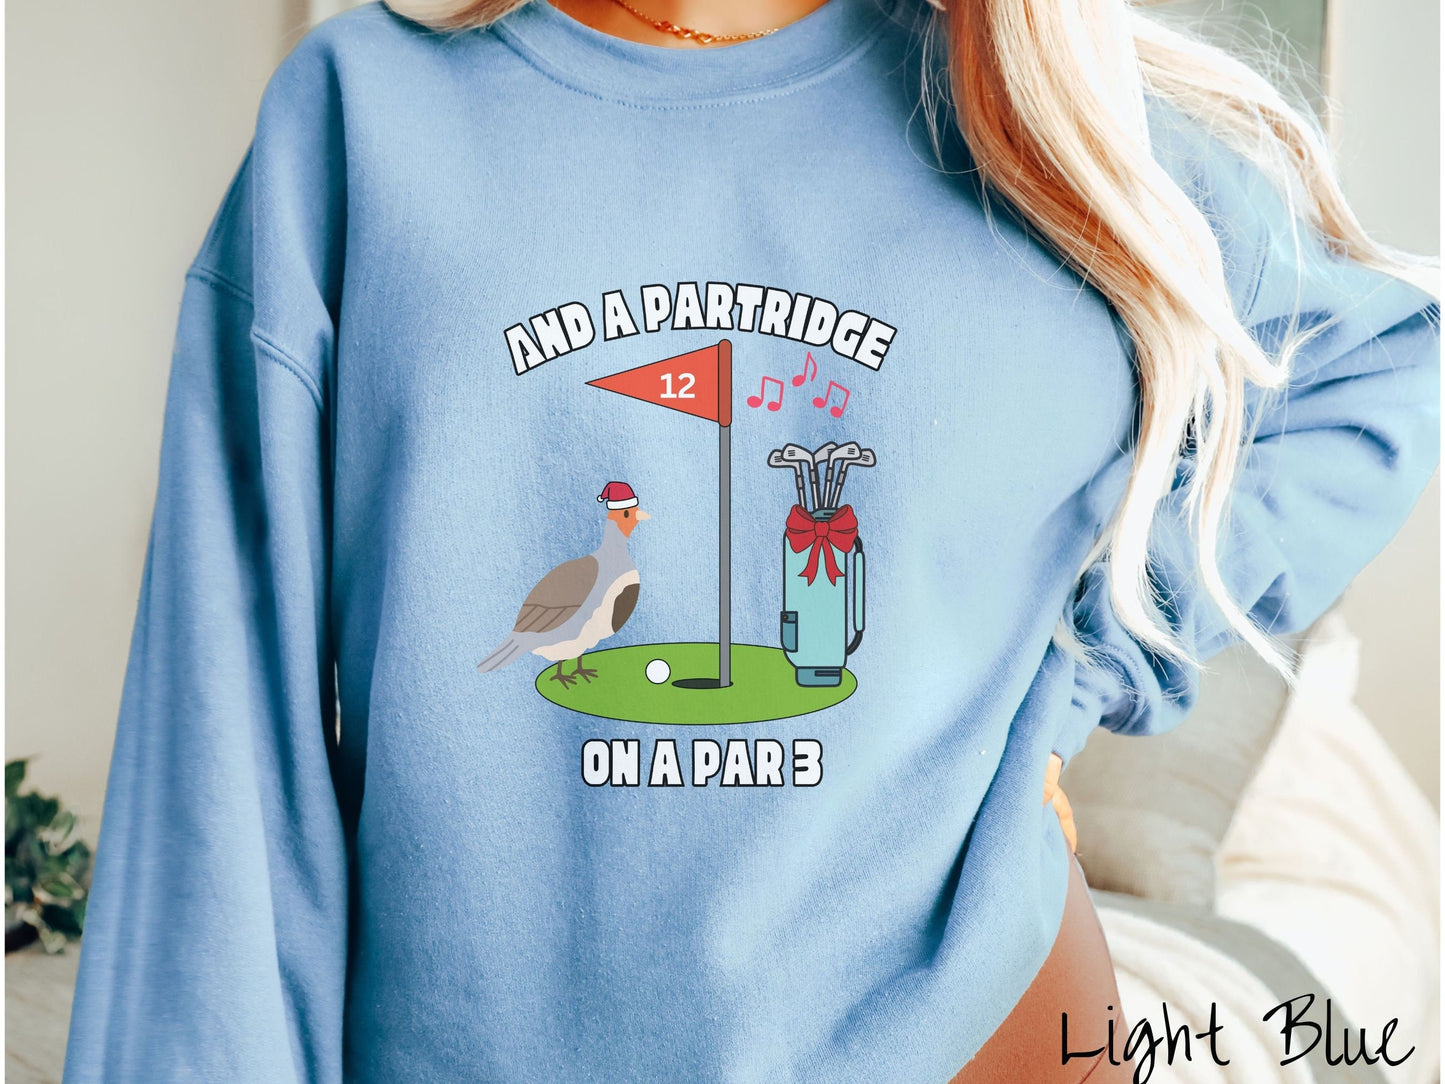 A woman wearing a cute light blue colored sweatshirt with a partridge bird on a golf green next to a hole with a flag in it with #12 on it. There is also a set of golf clubs with a red bow and music playing in the air.